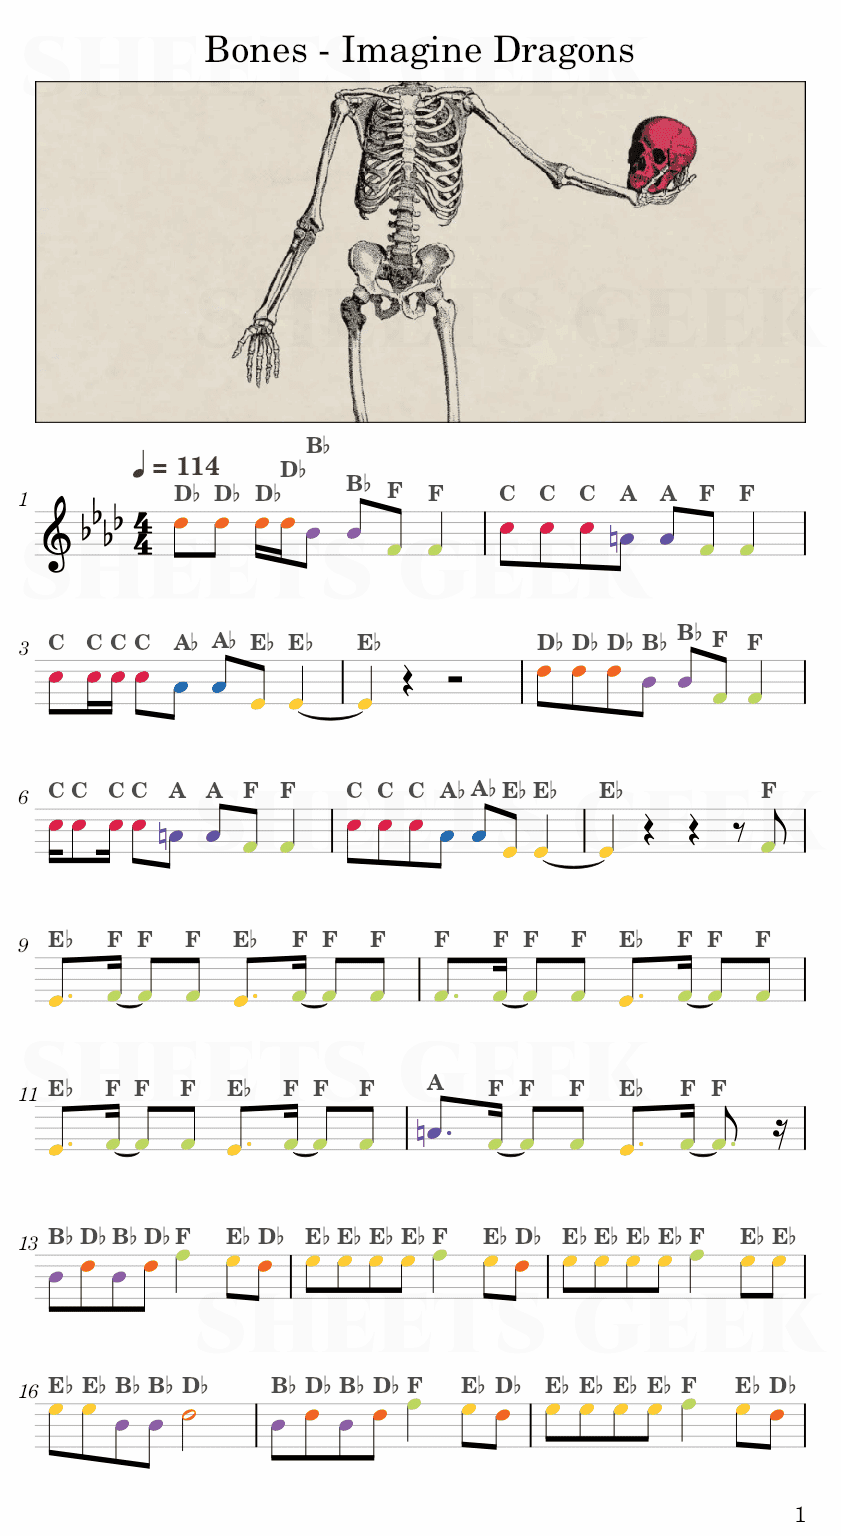 Bones - Imagine Dragons Easy Sheet Music Free for piano, keyboard, flute, violin, sax, cello page 1